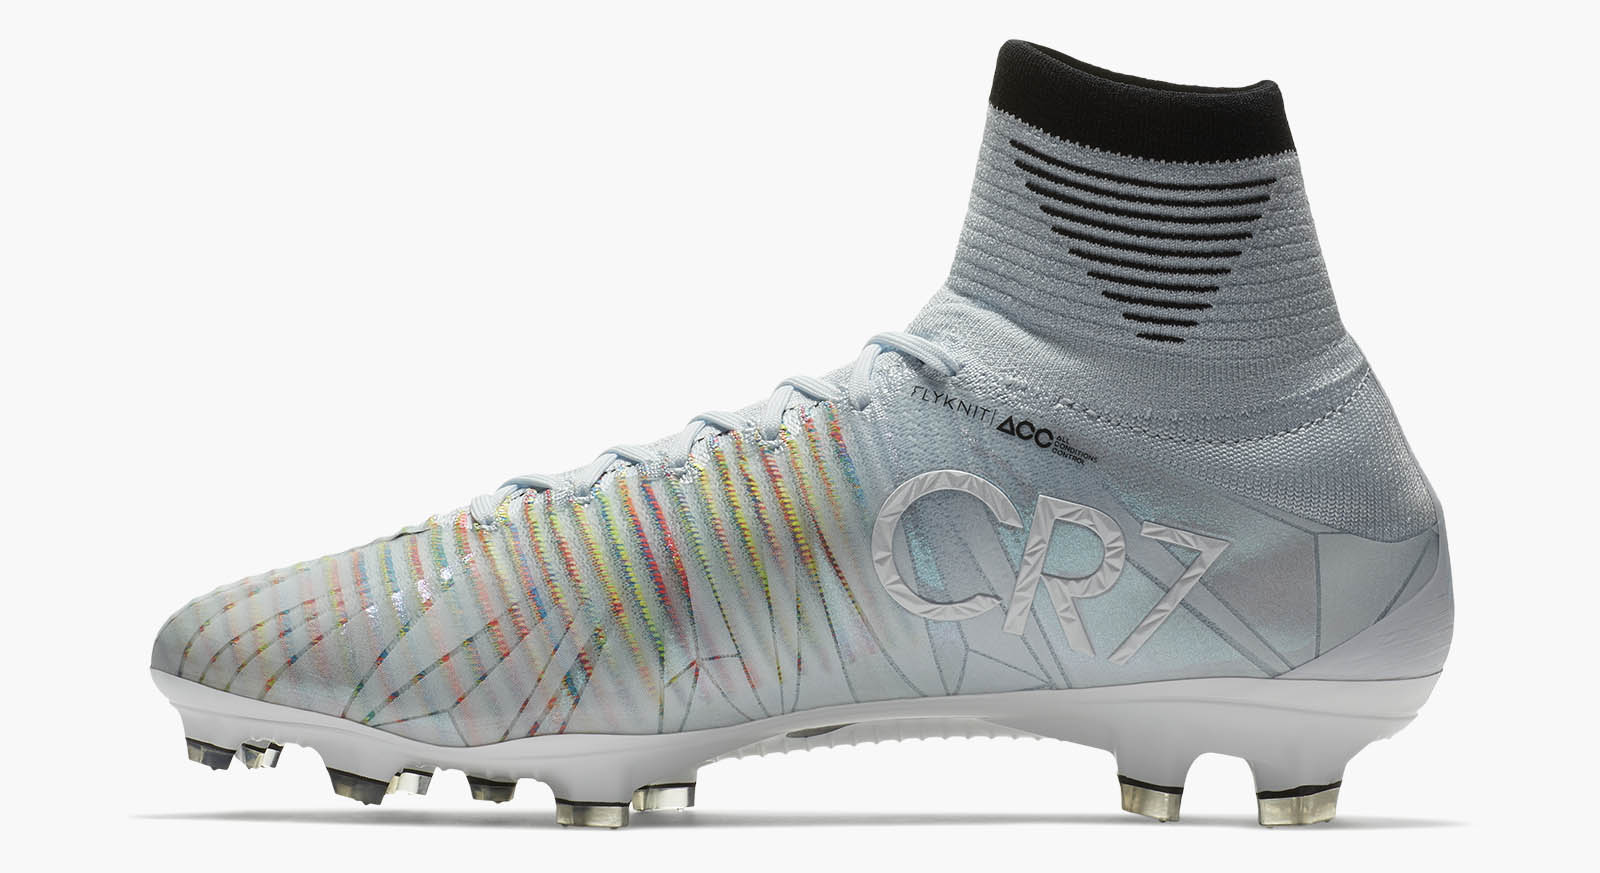 Nike Mercurial V Cristiano Ronaldo Chapter 5 'Cut to Brilliance' Boots Released - Footy Headlines